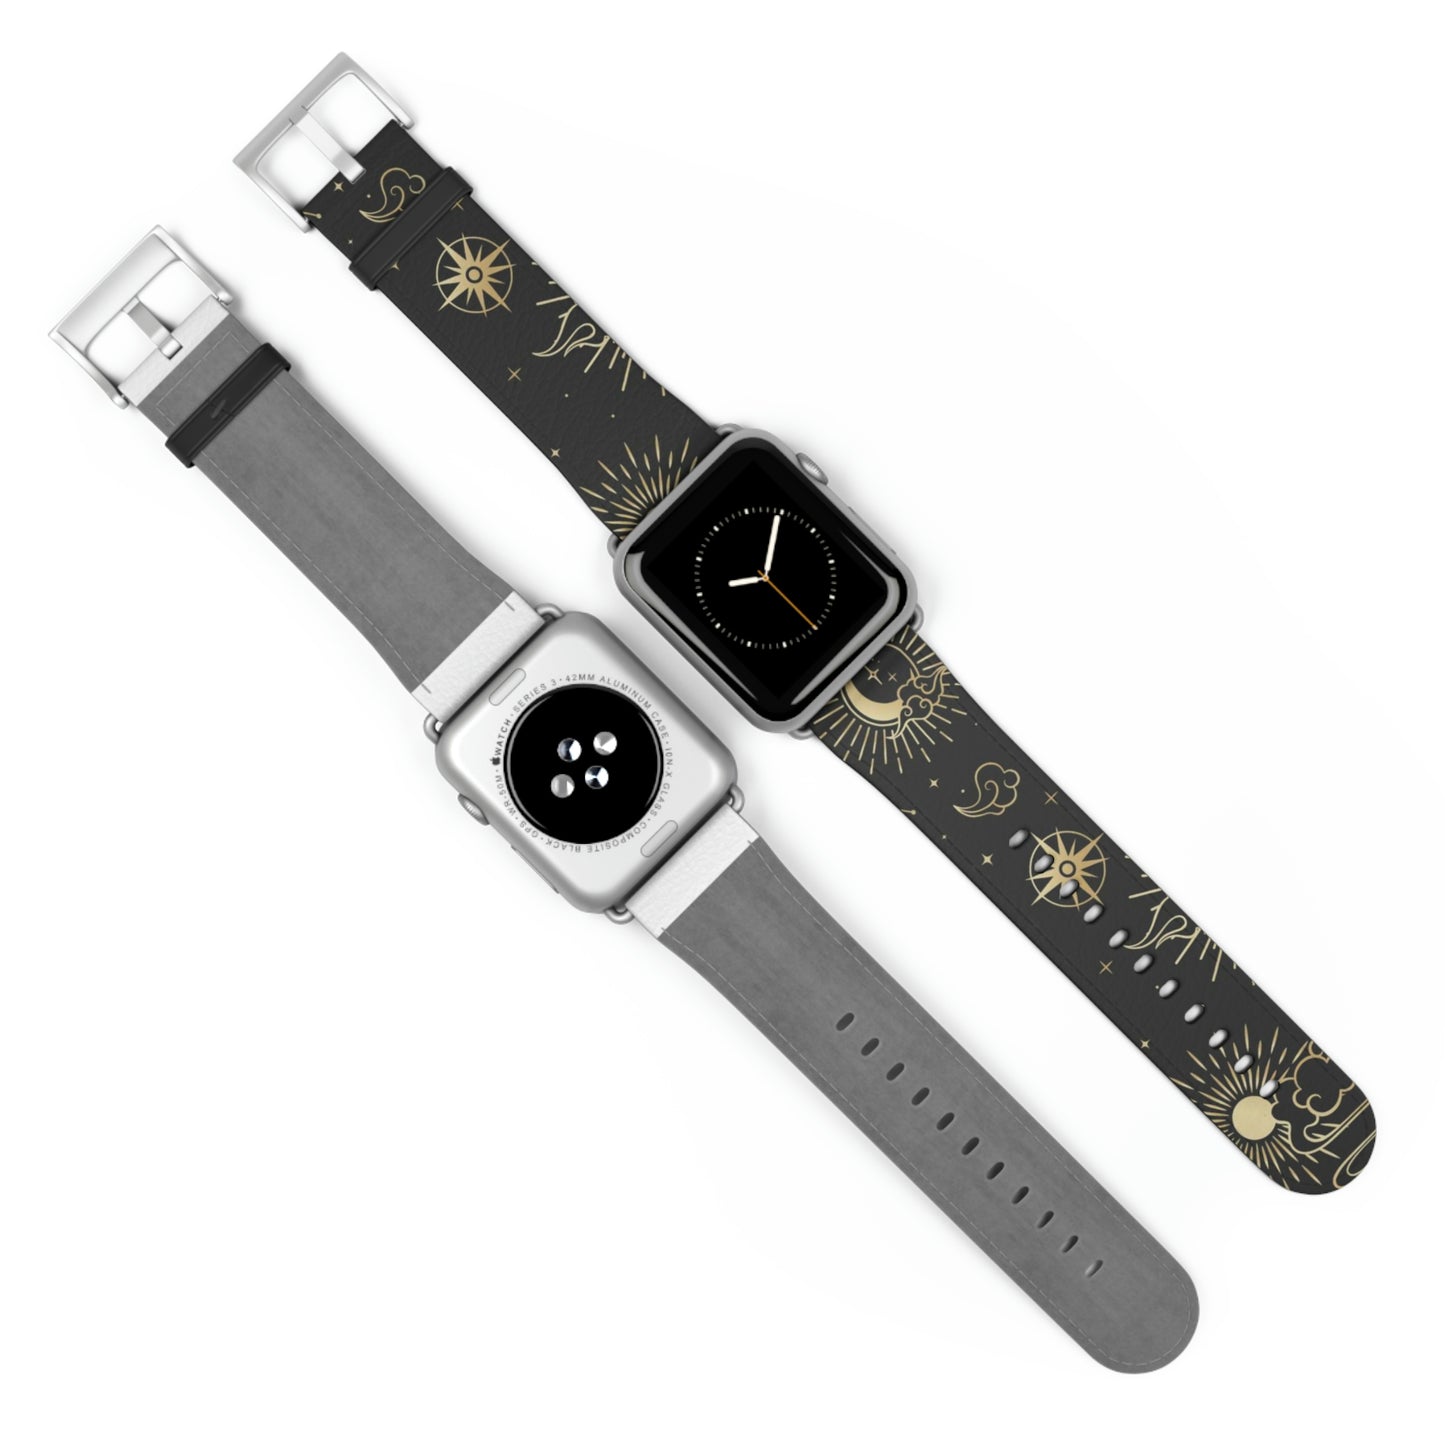 Moon Stars Apple Watch Band, Black Witchy Celestial iWatch Vegan Faux Leather Straps 38mm 40mm 42mm 44mm Series 3 4 5 6 7 SE Women